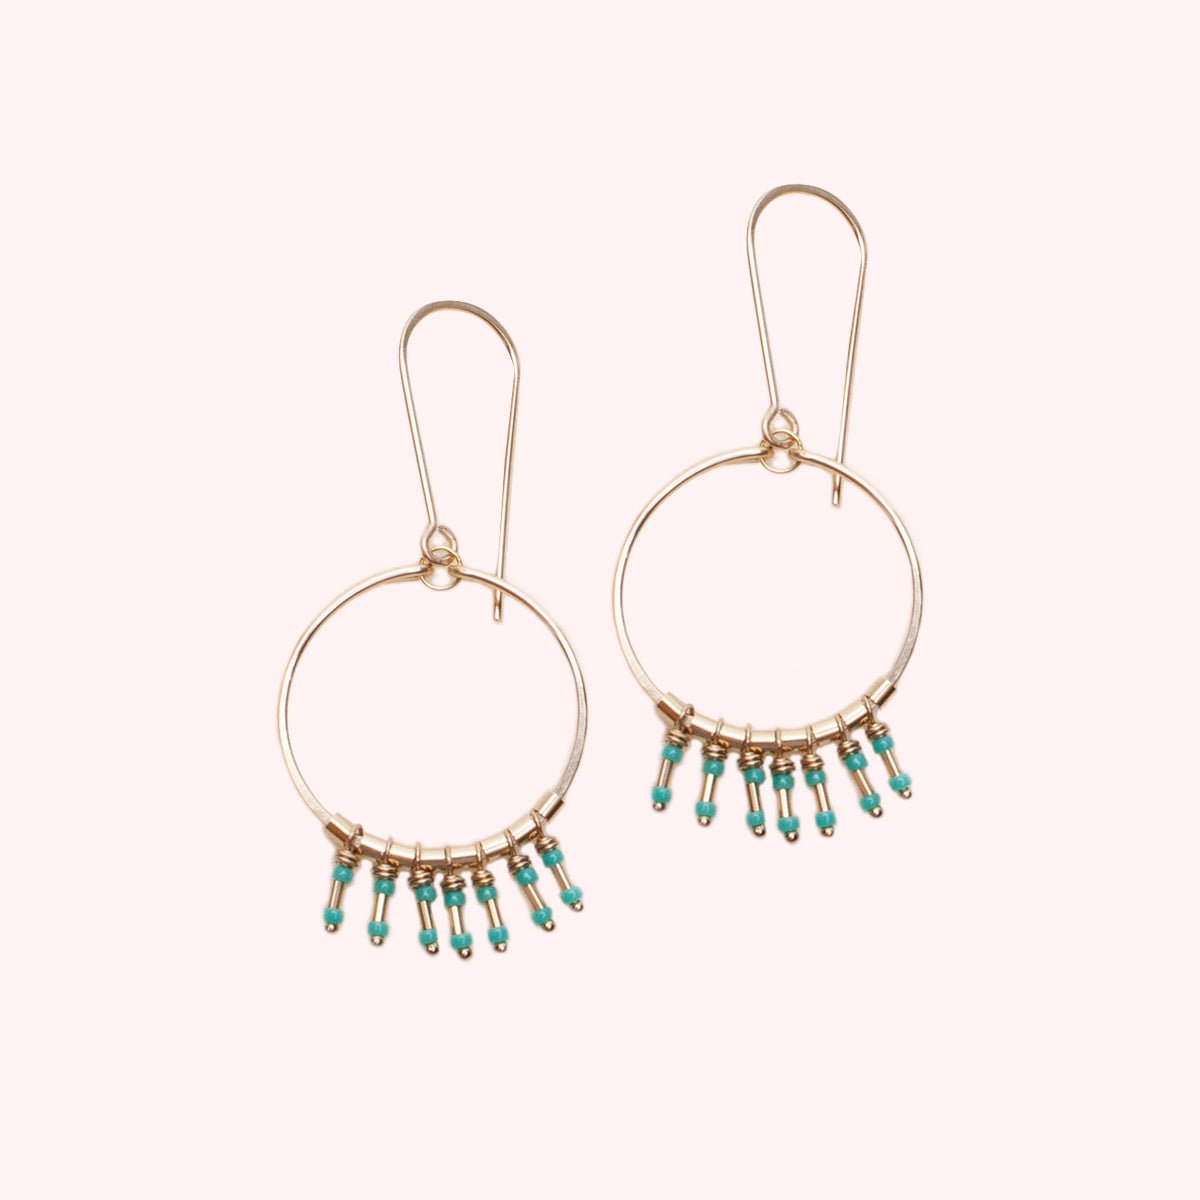 Clarice Earrings in Turquoise